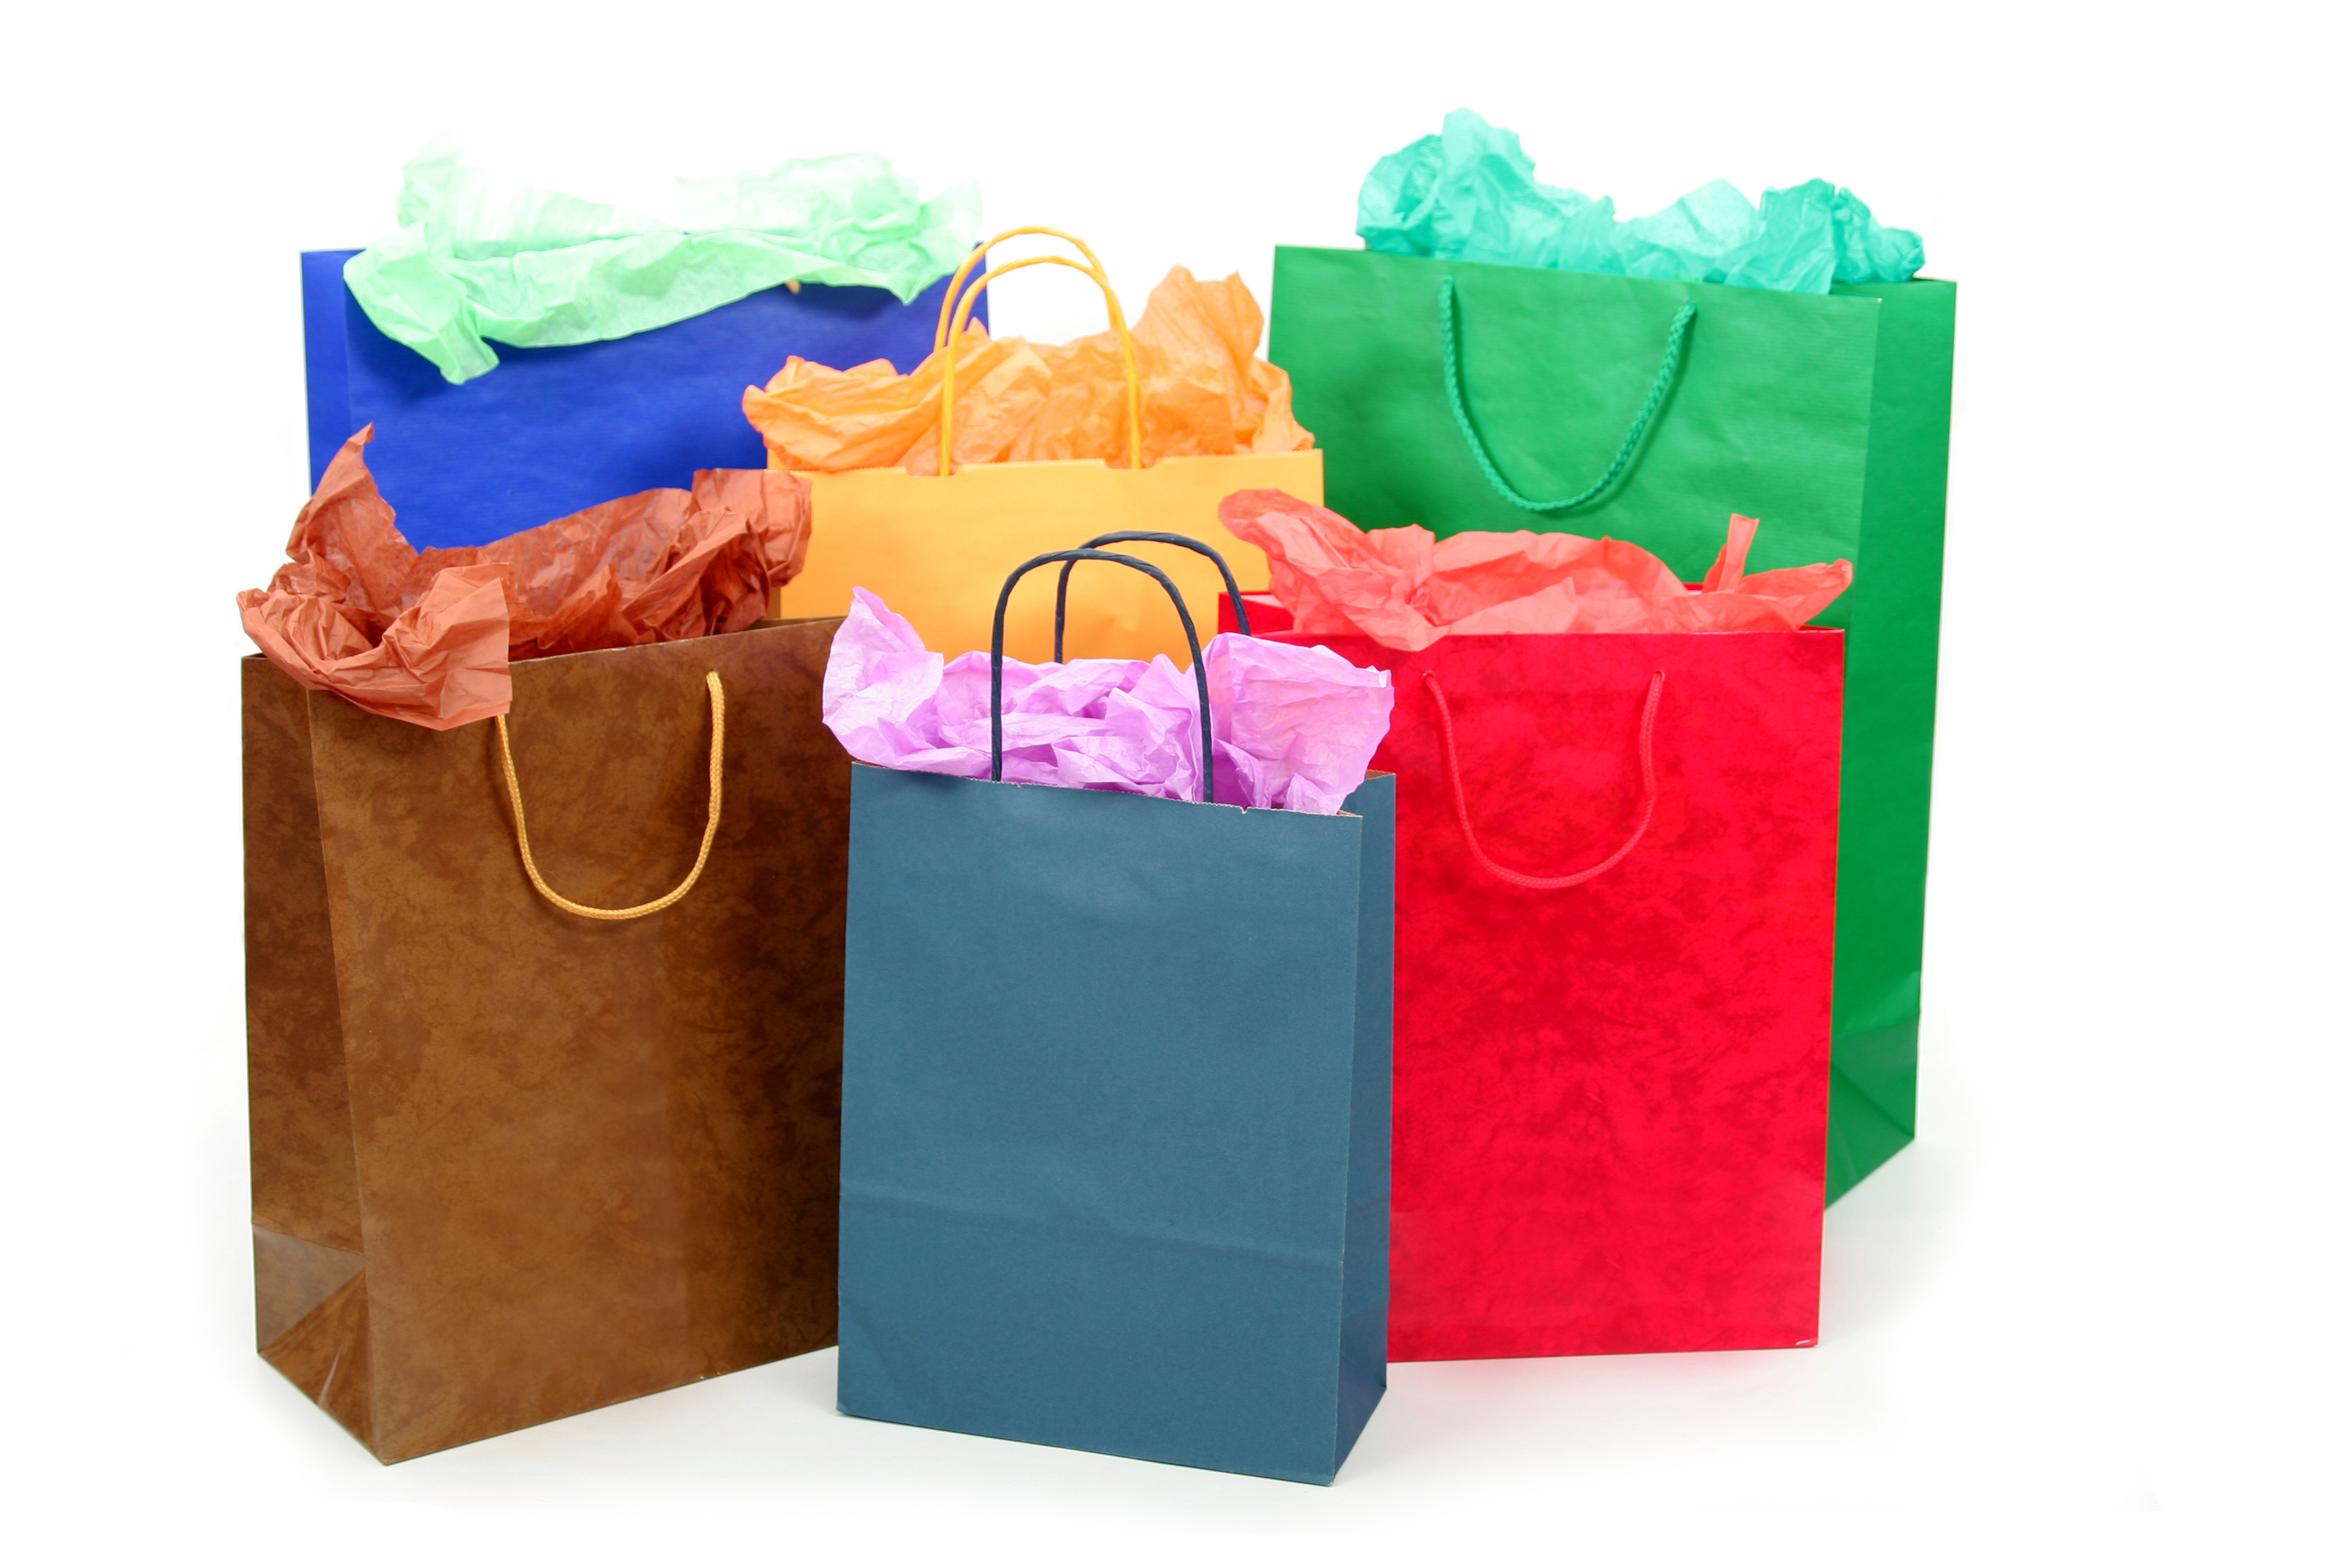 Pics Of Shopping Bags - ClipArt Best